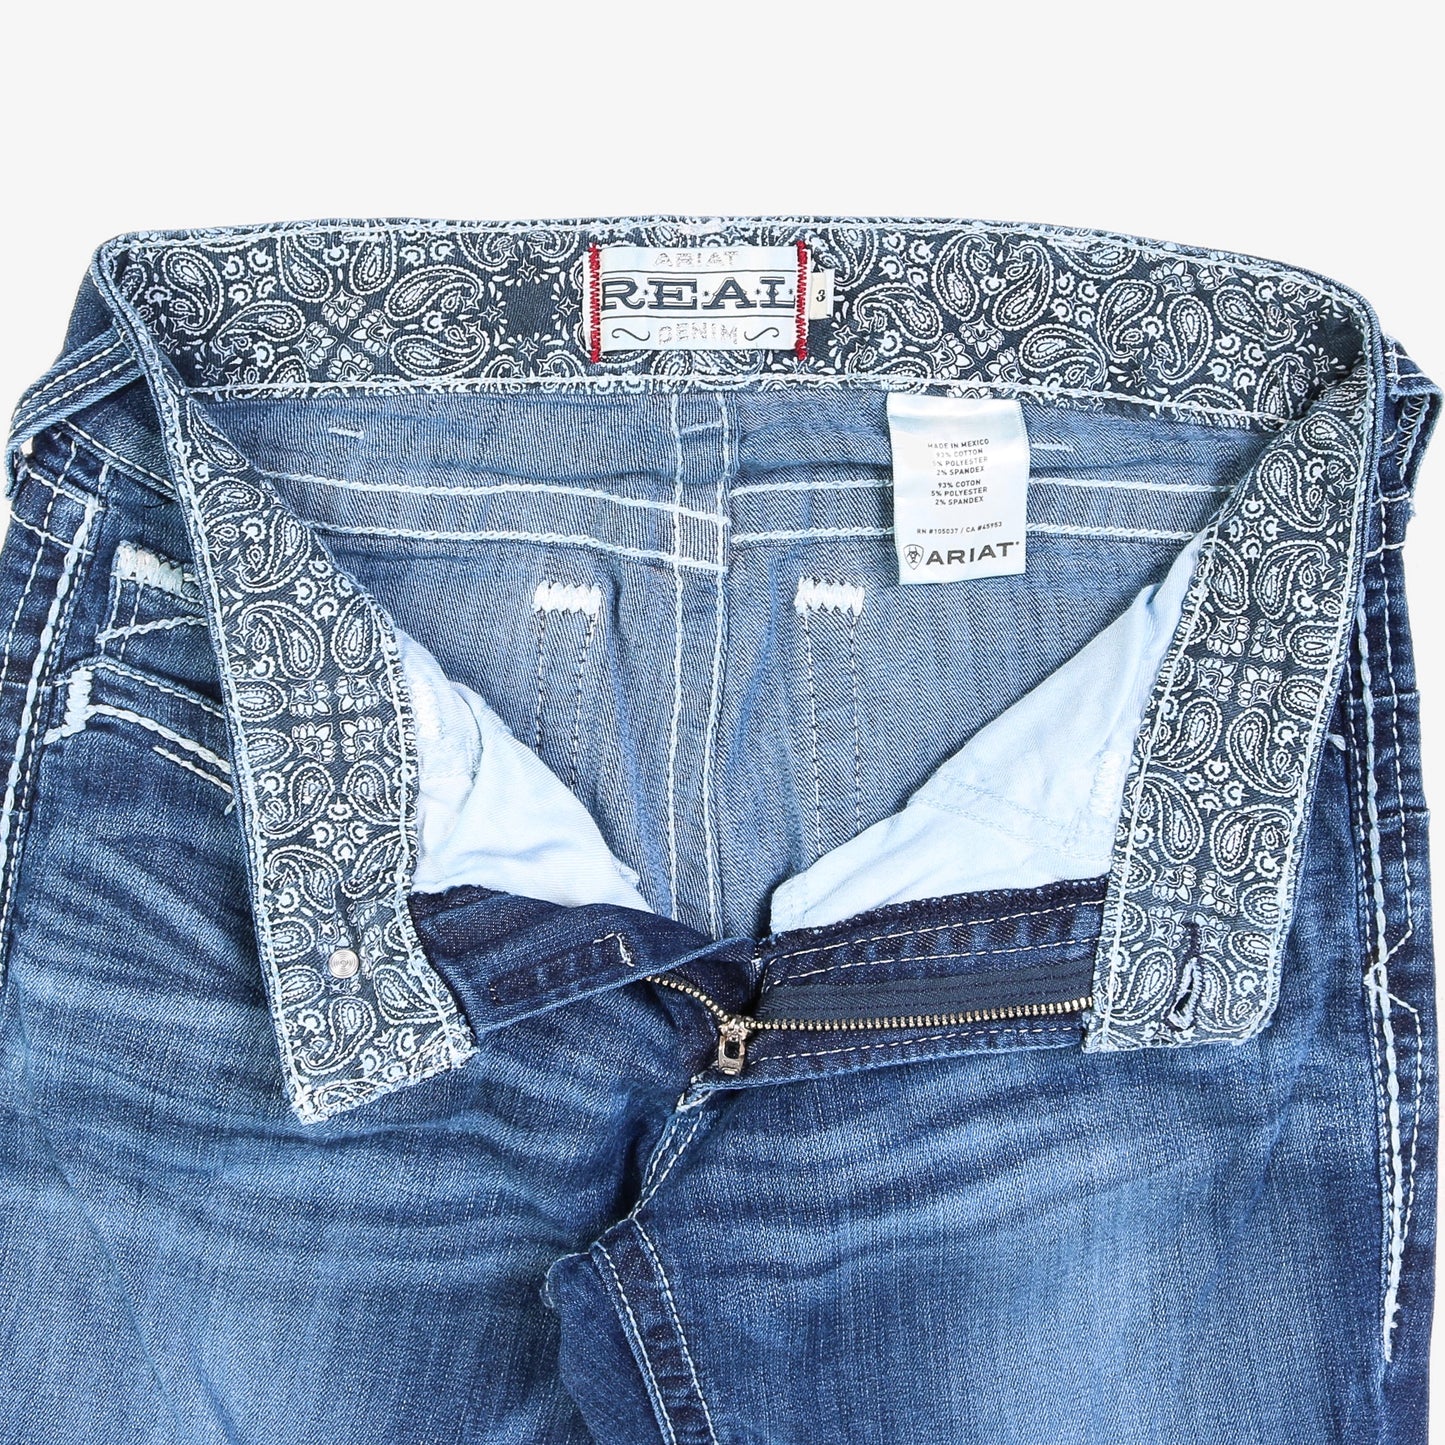 Ariat Real Denim Jeans - 30" - American Madness